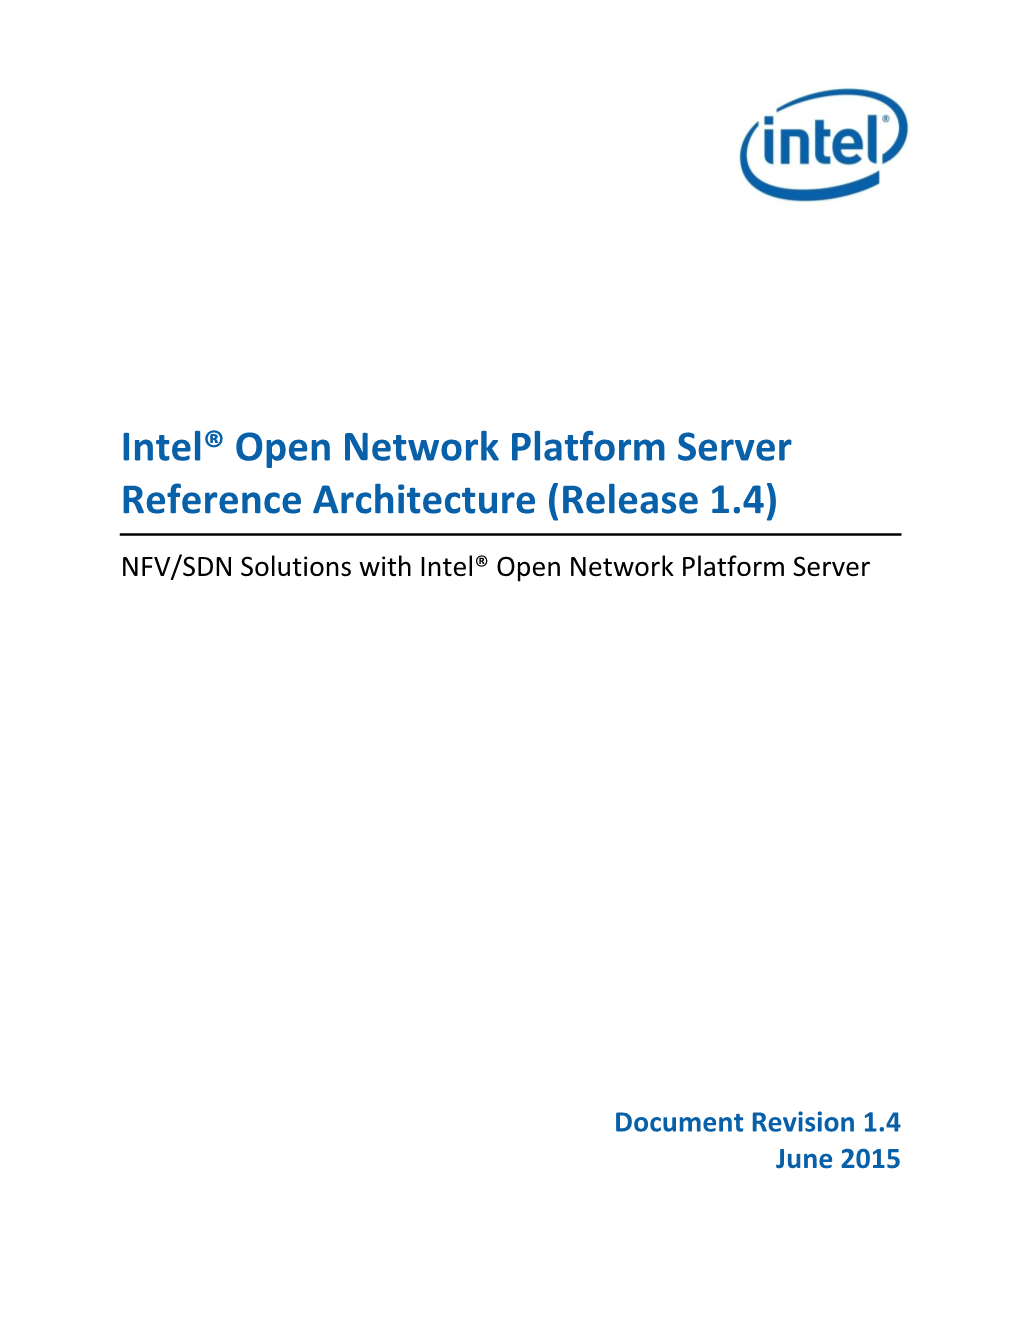 Intel® Open Network Platform Server Reference Architecture (Release 1.4)